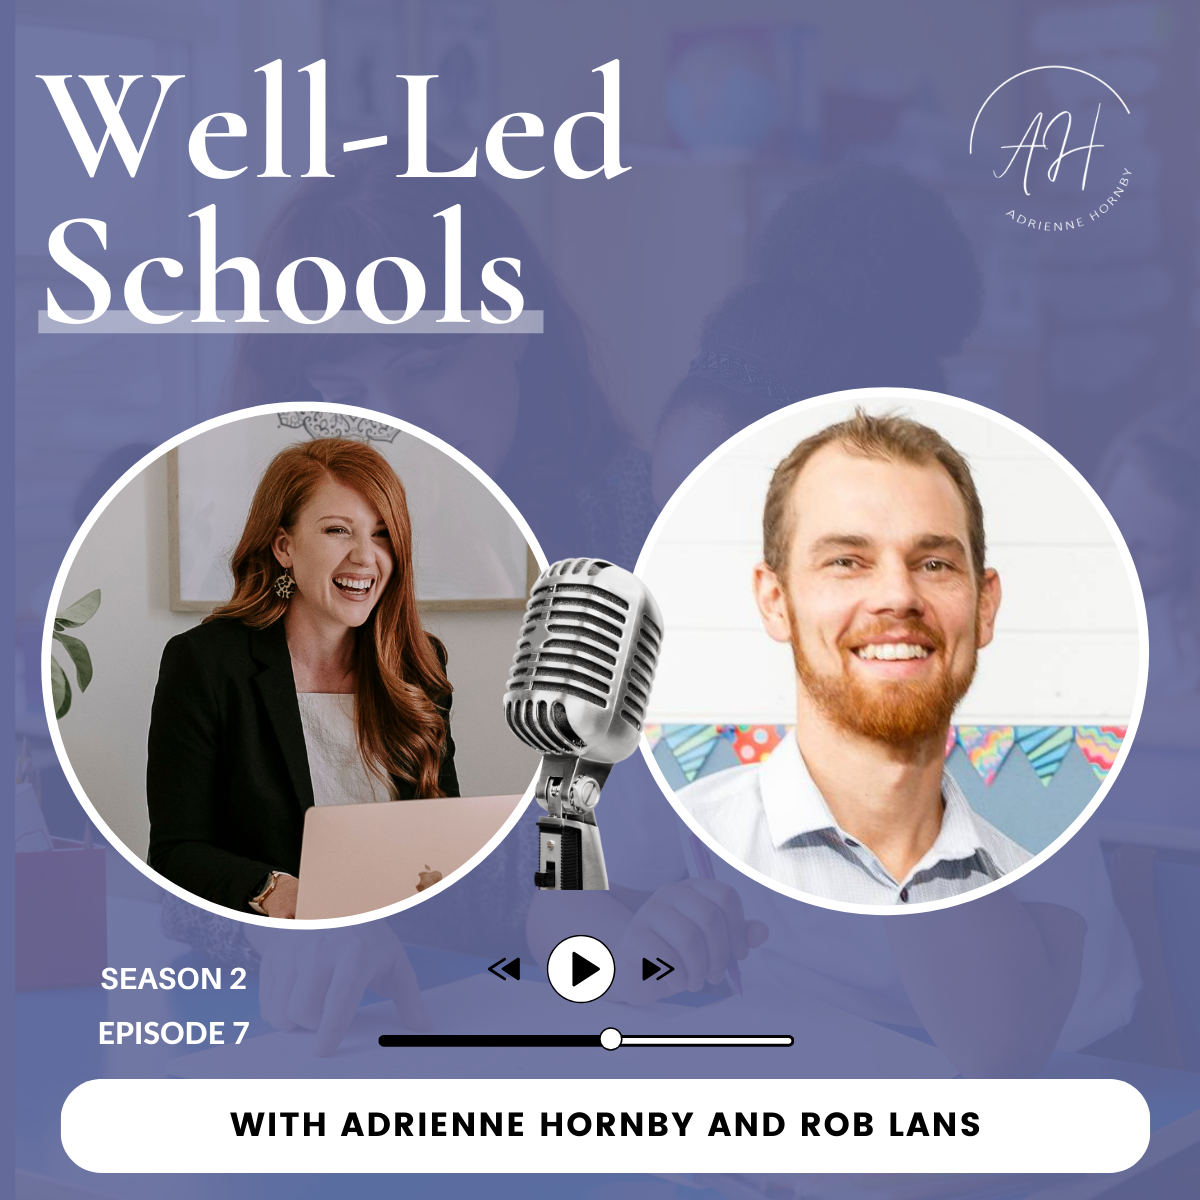 S2E7: The Six Proven Steps To Improved Staff Wellbeing and Culture at Your School with Rob Lans